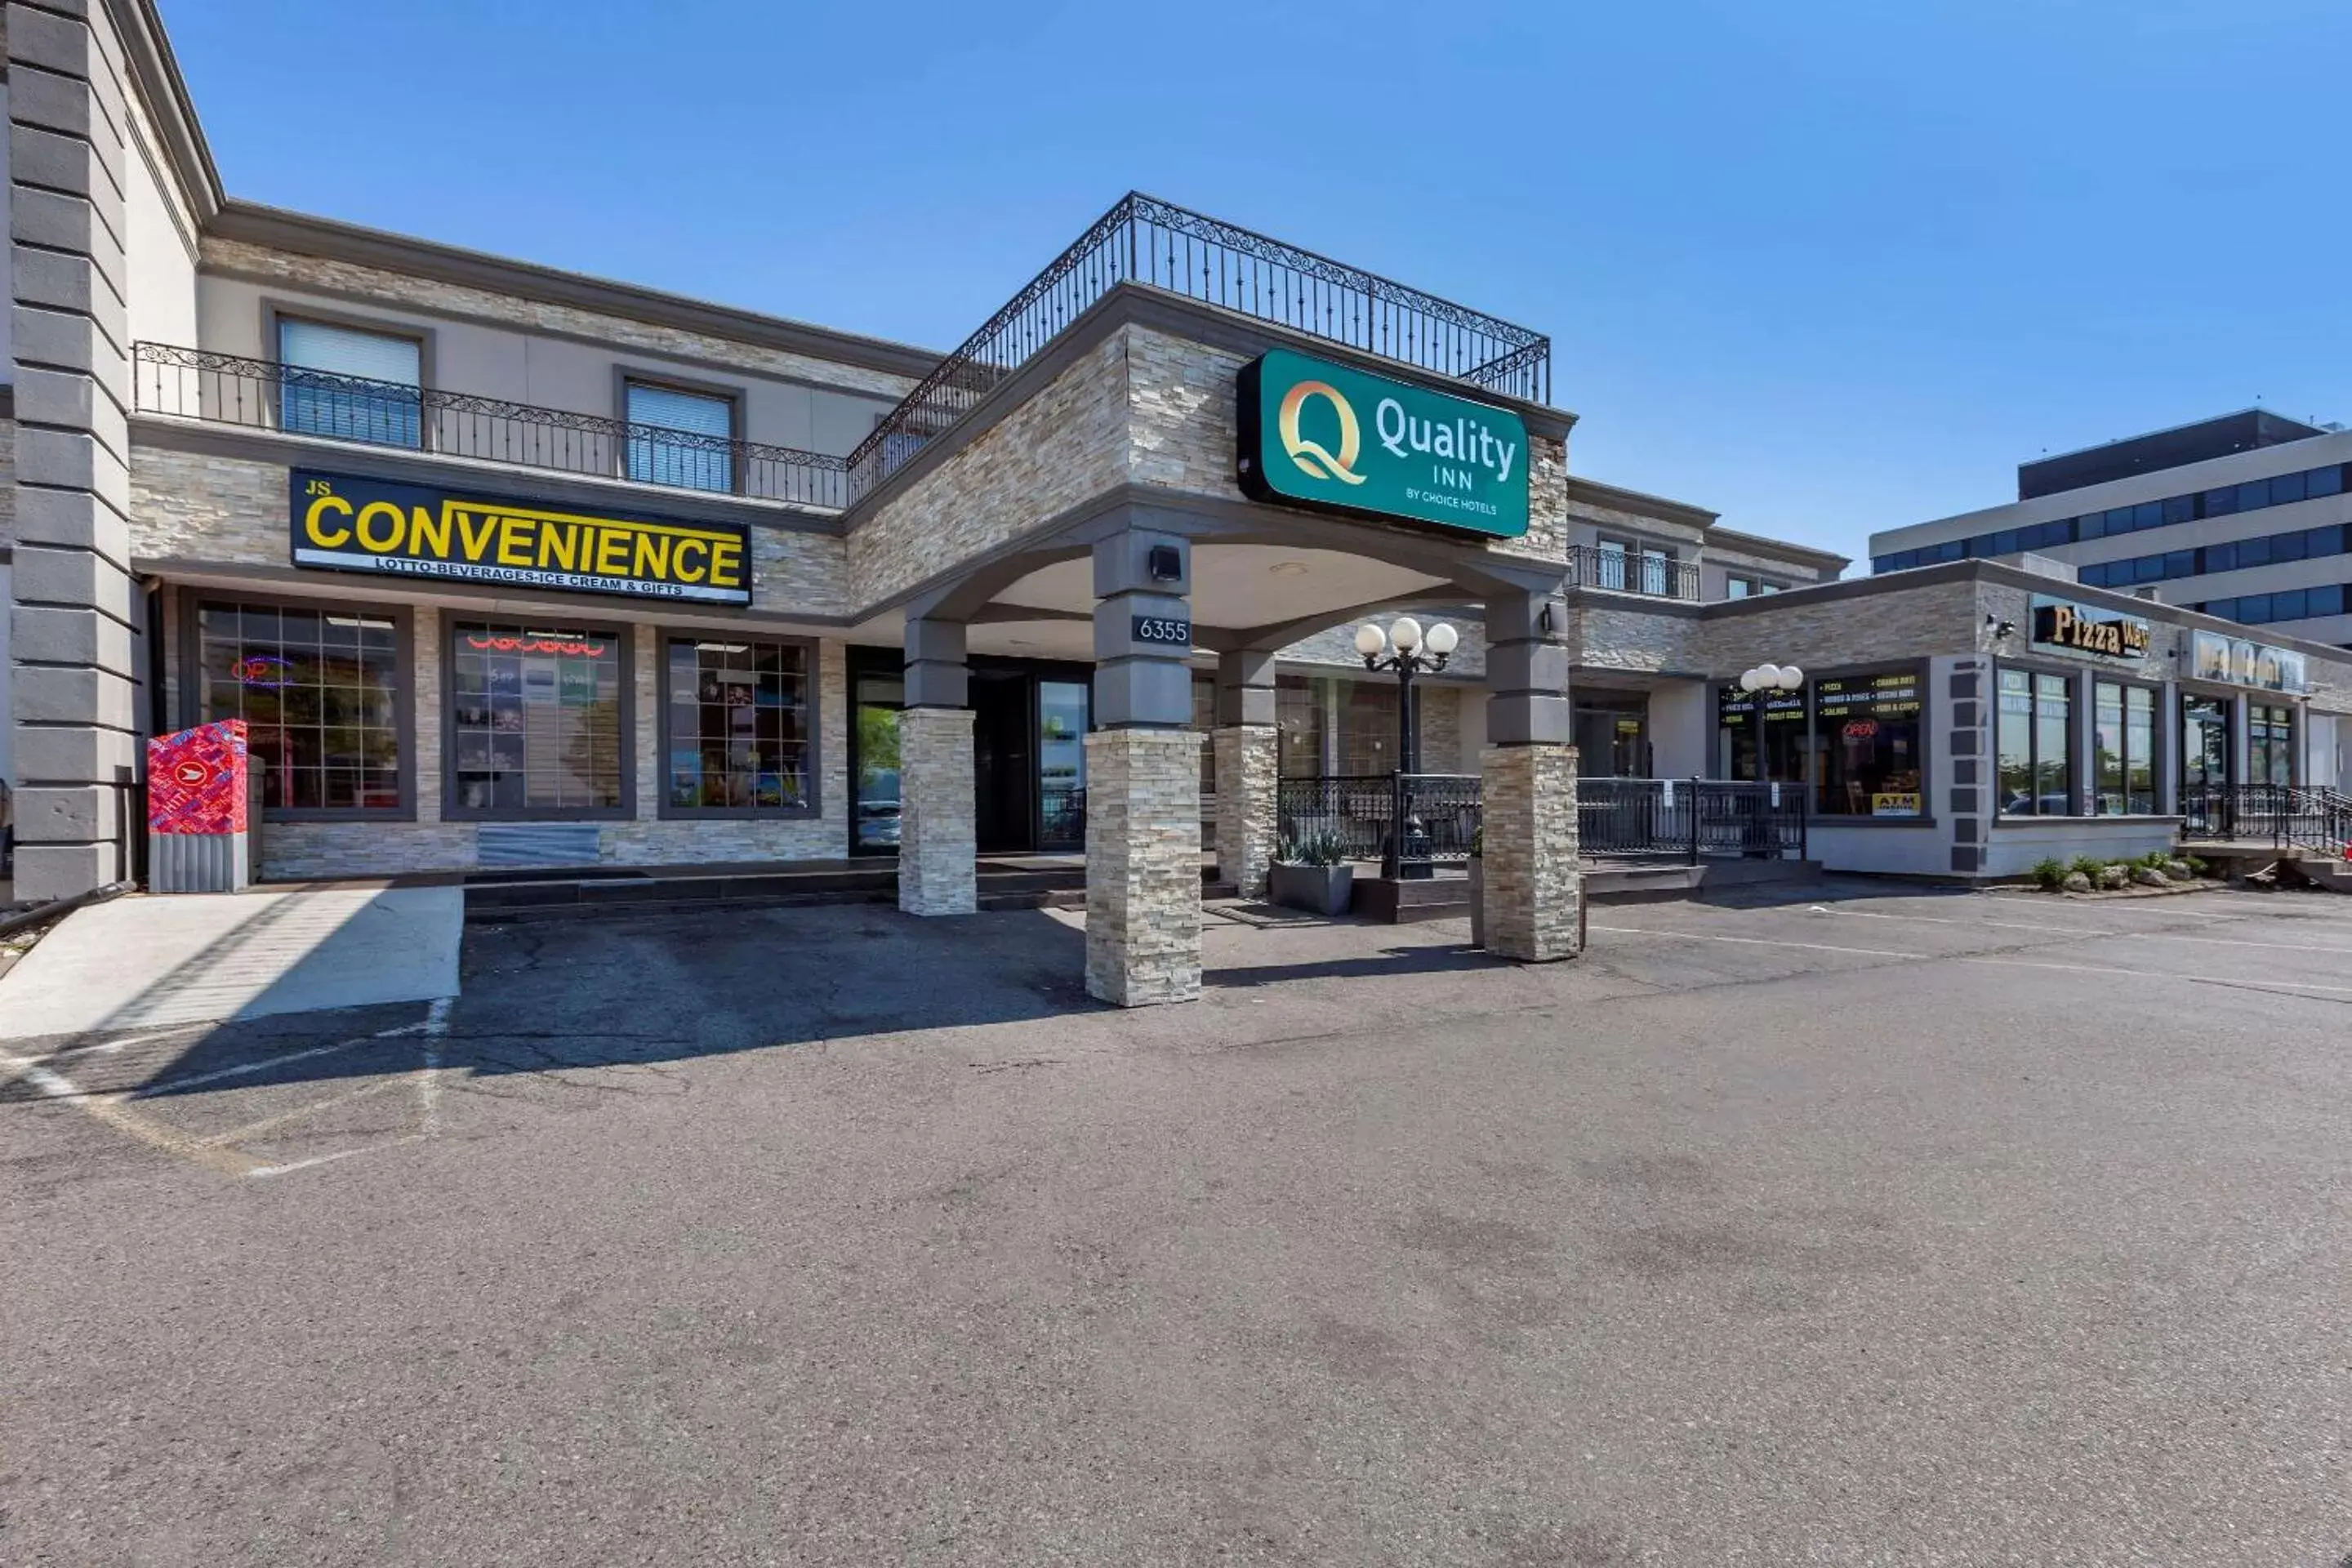 Property Building in Quality Inn Toronto Airport